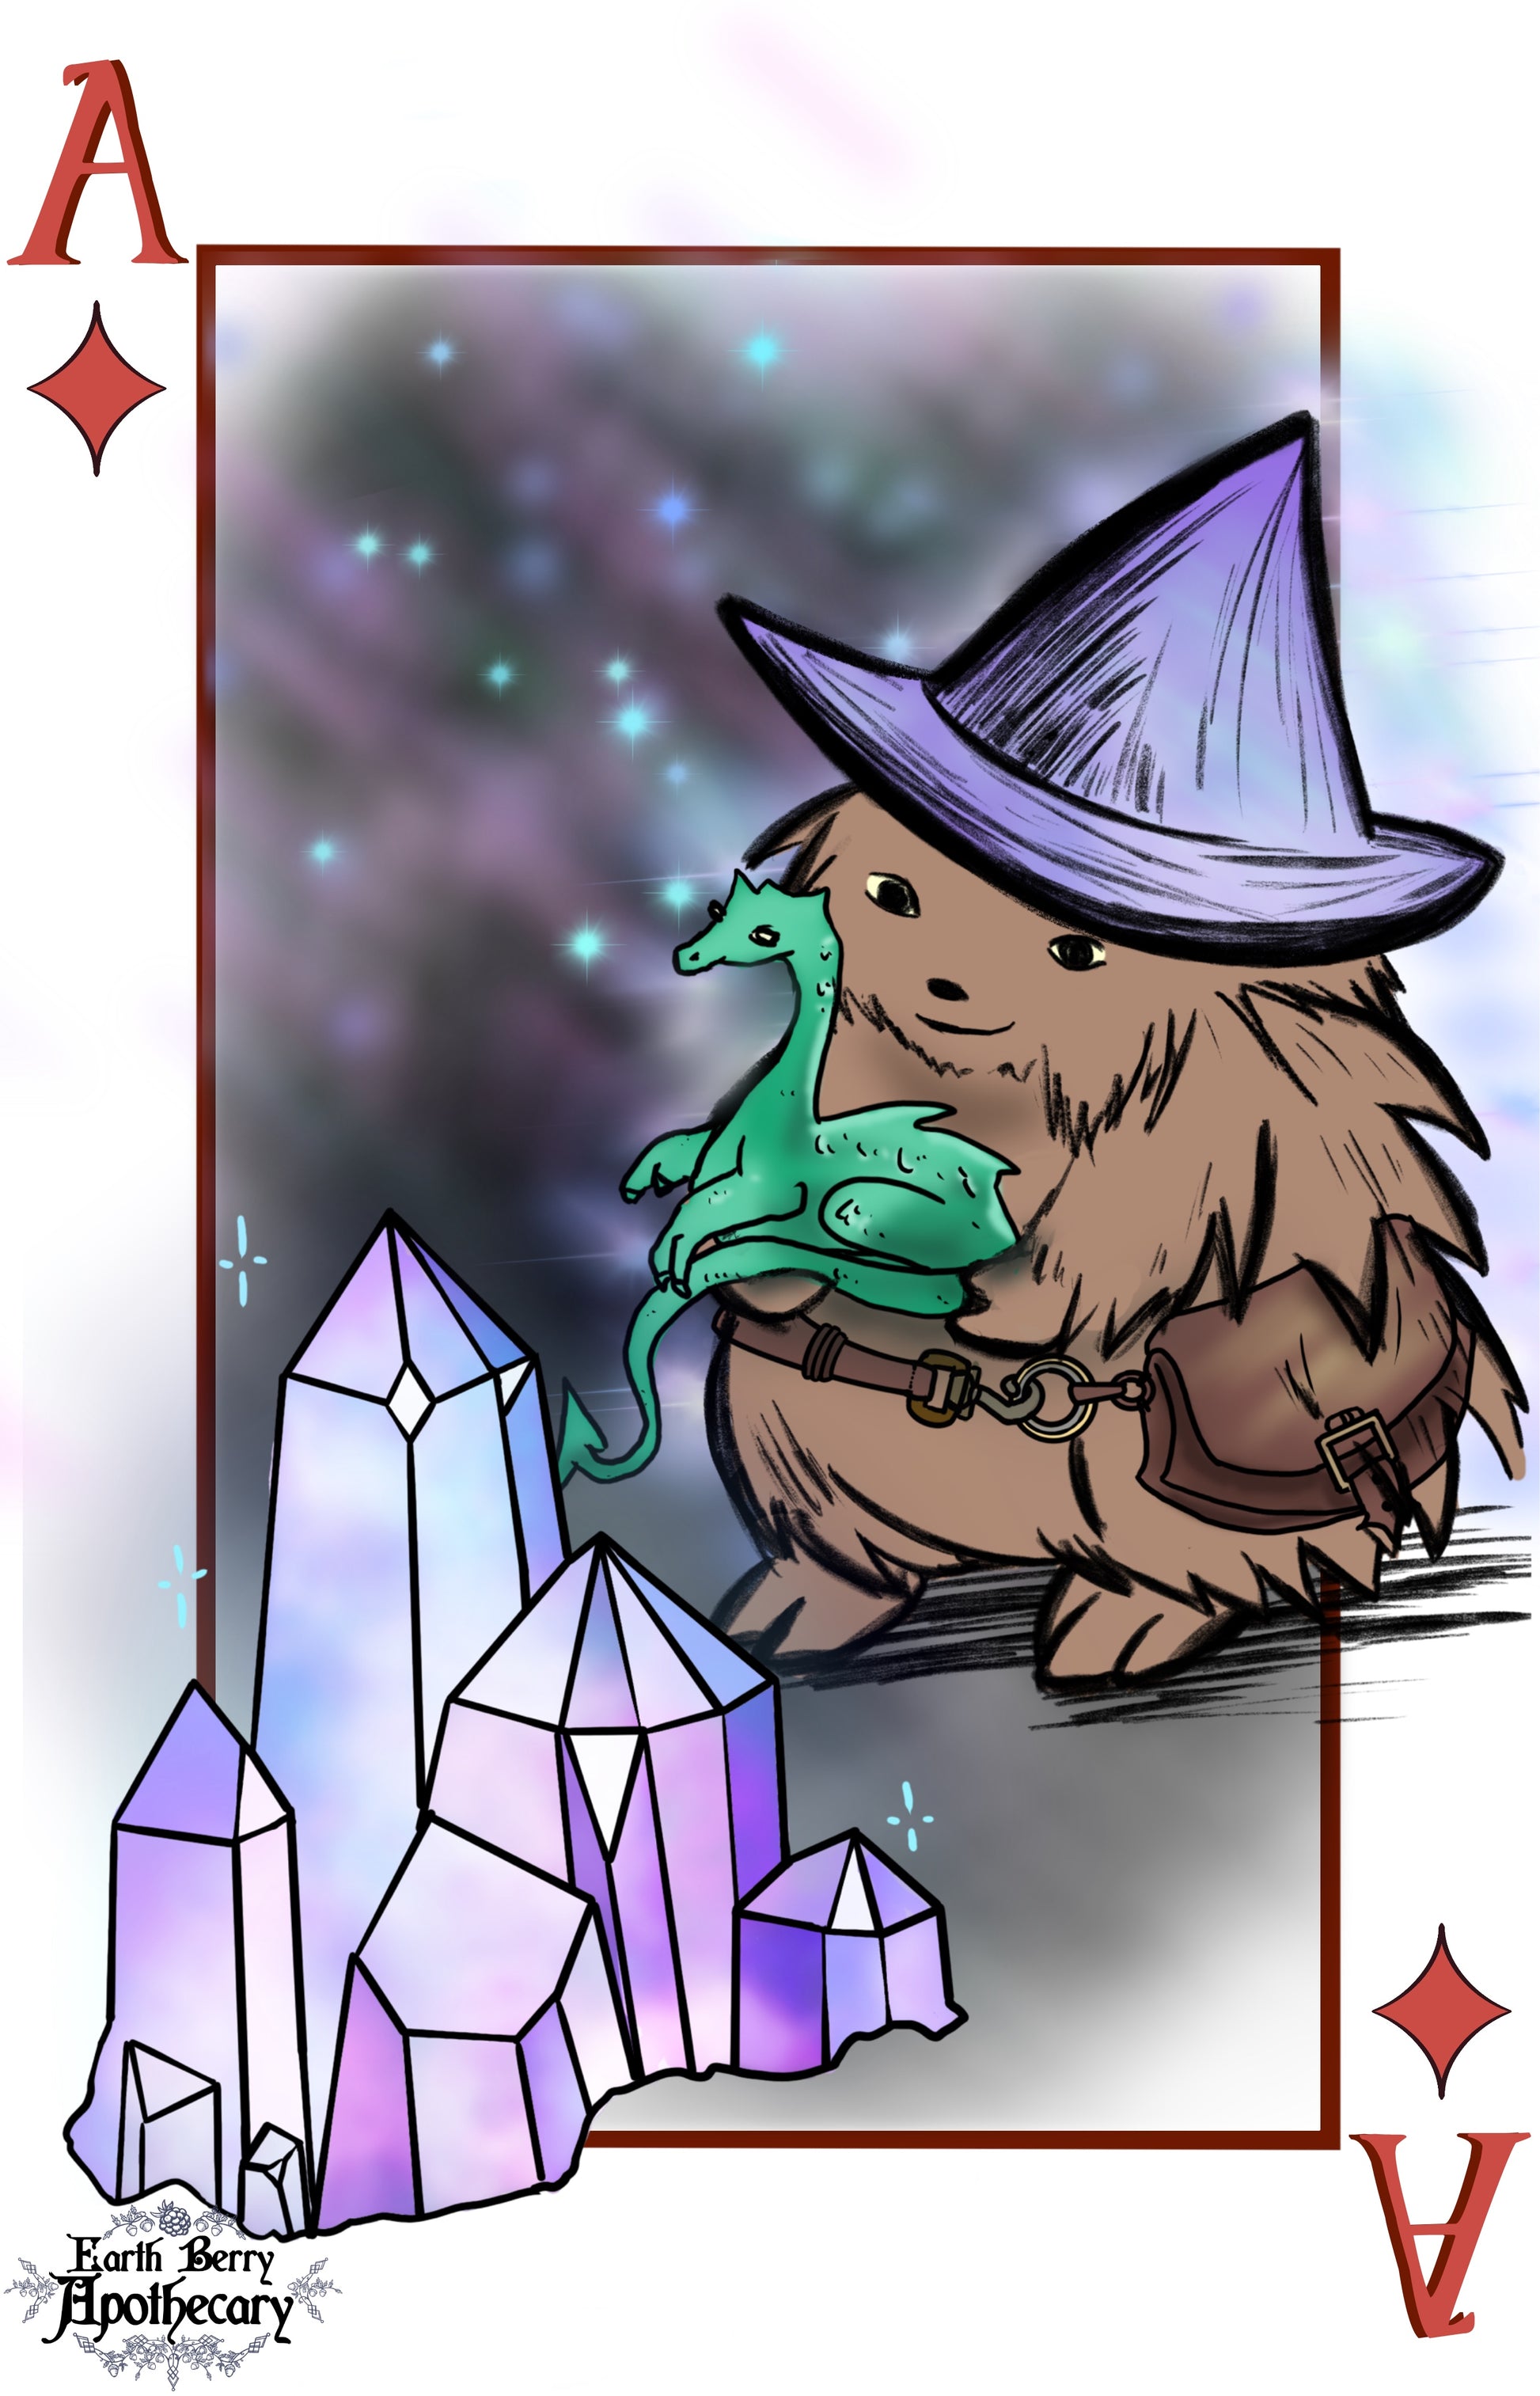 Fantasy themed playing cards. The hedge witch holds a baby dragon. Sparkling crystals light the way through the crystal cave.